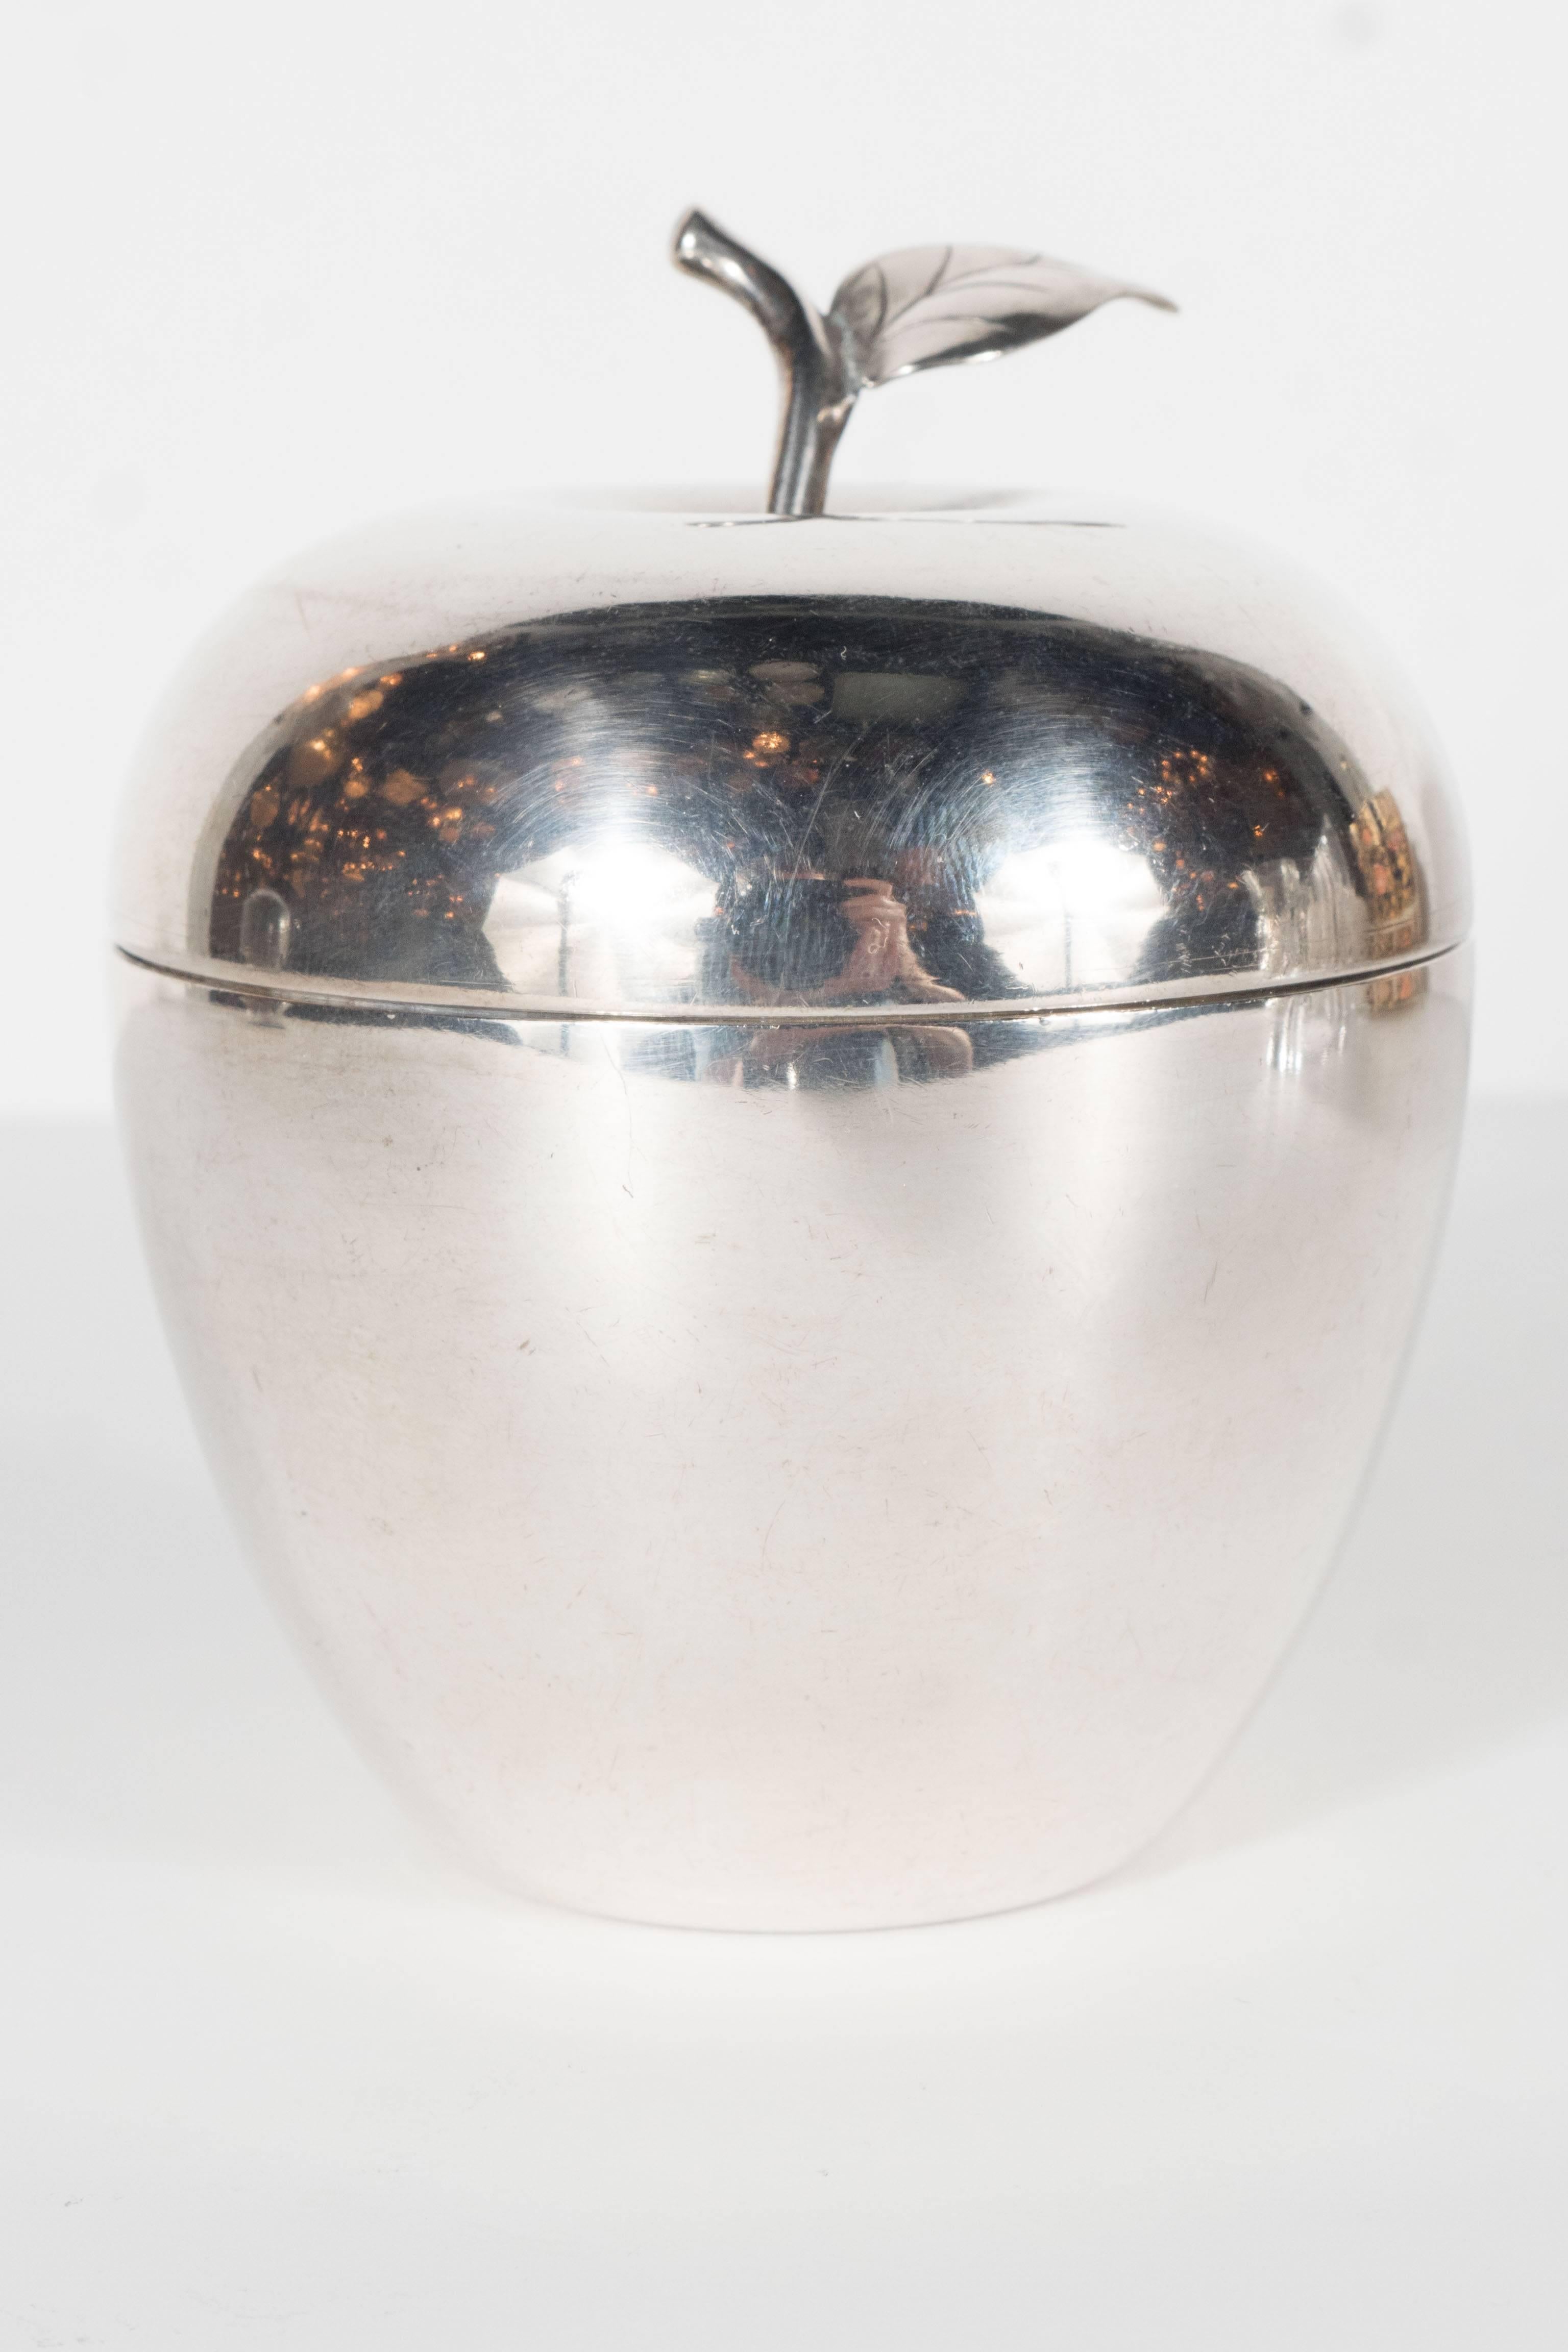 A stunning figural box by Tiffany & Co., this large apple shape box is beautifully rendered in sterling silver and is complete with stem and leaf.
Hallmarks: Stamped on the underside Tiffany & Co Makers, Sterling, 23748, 88.
Weight: A sturdy piece